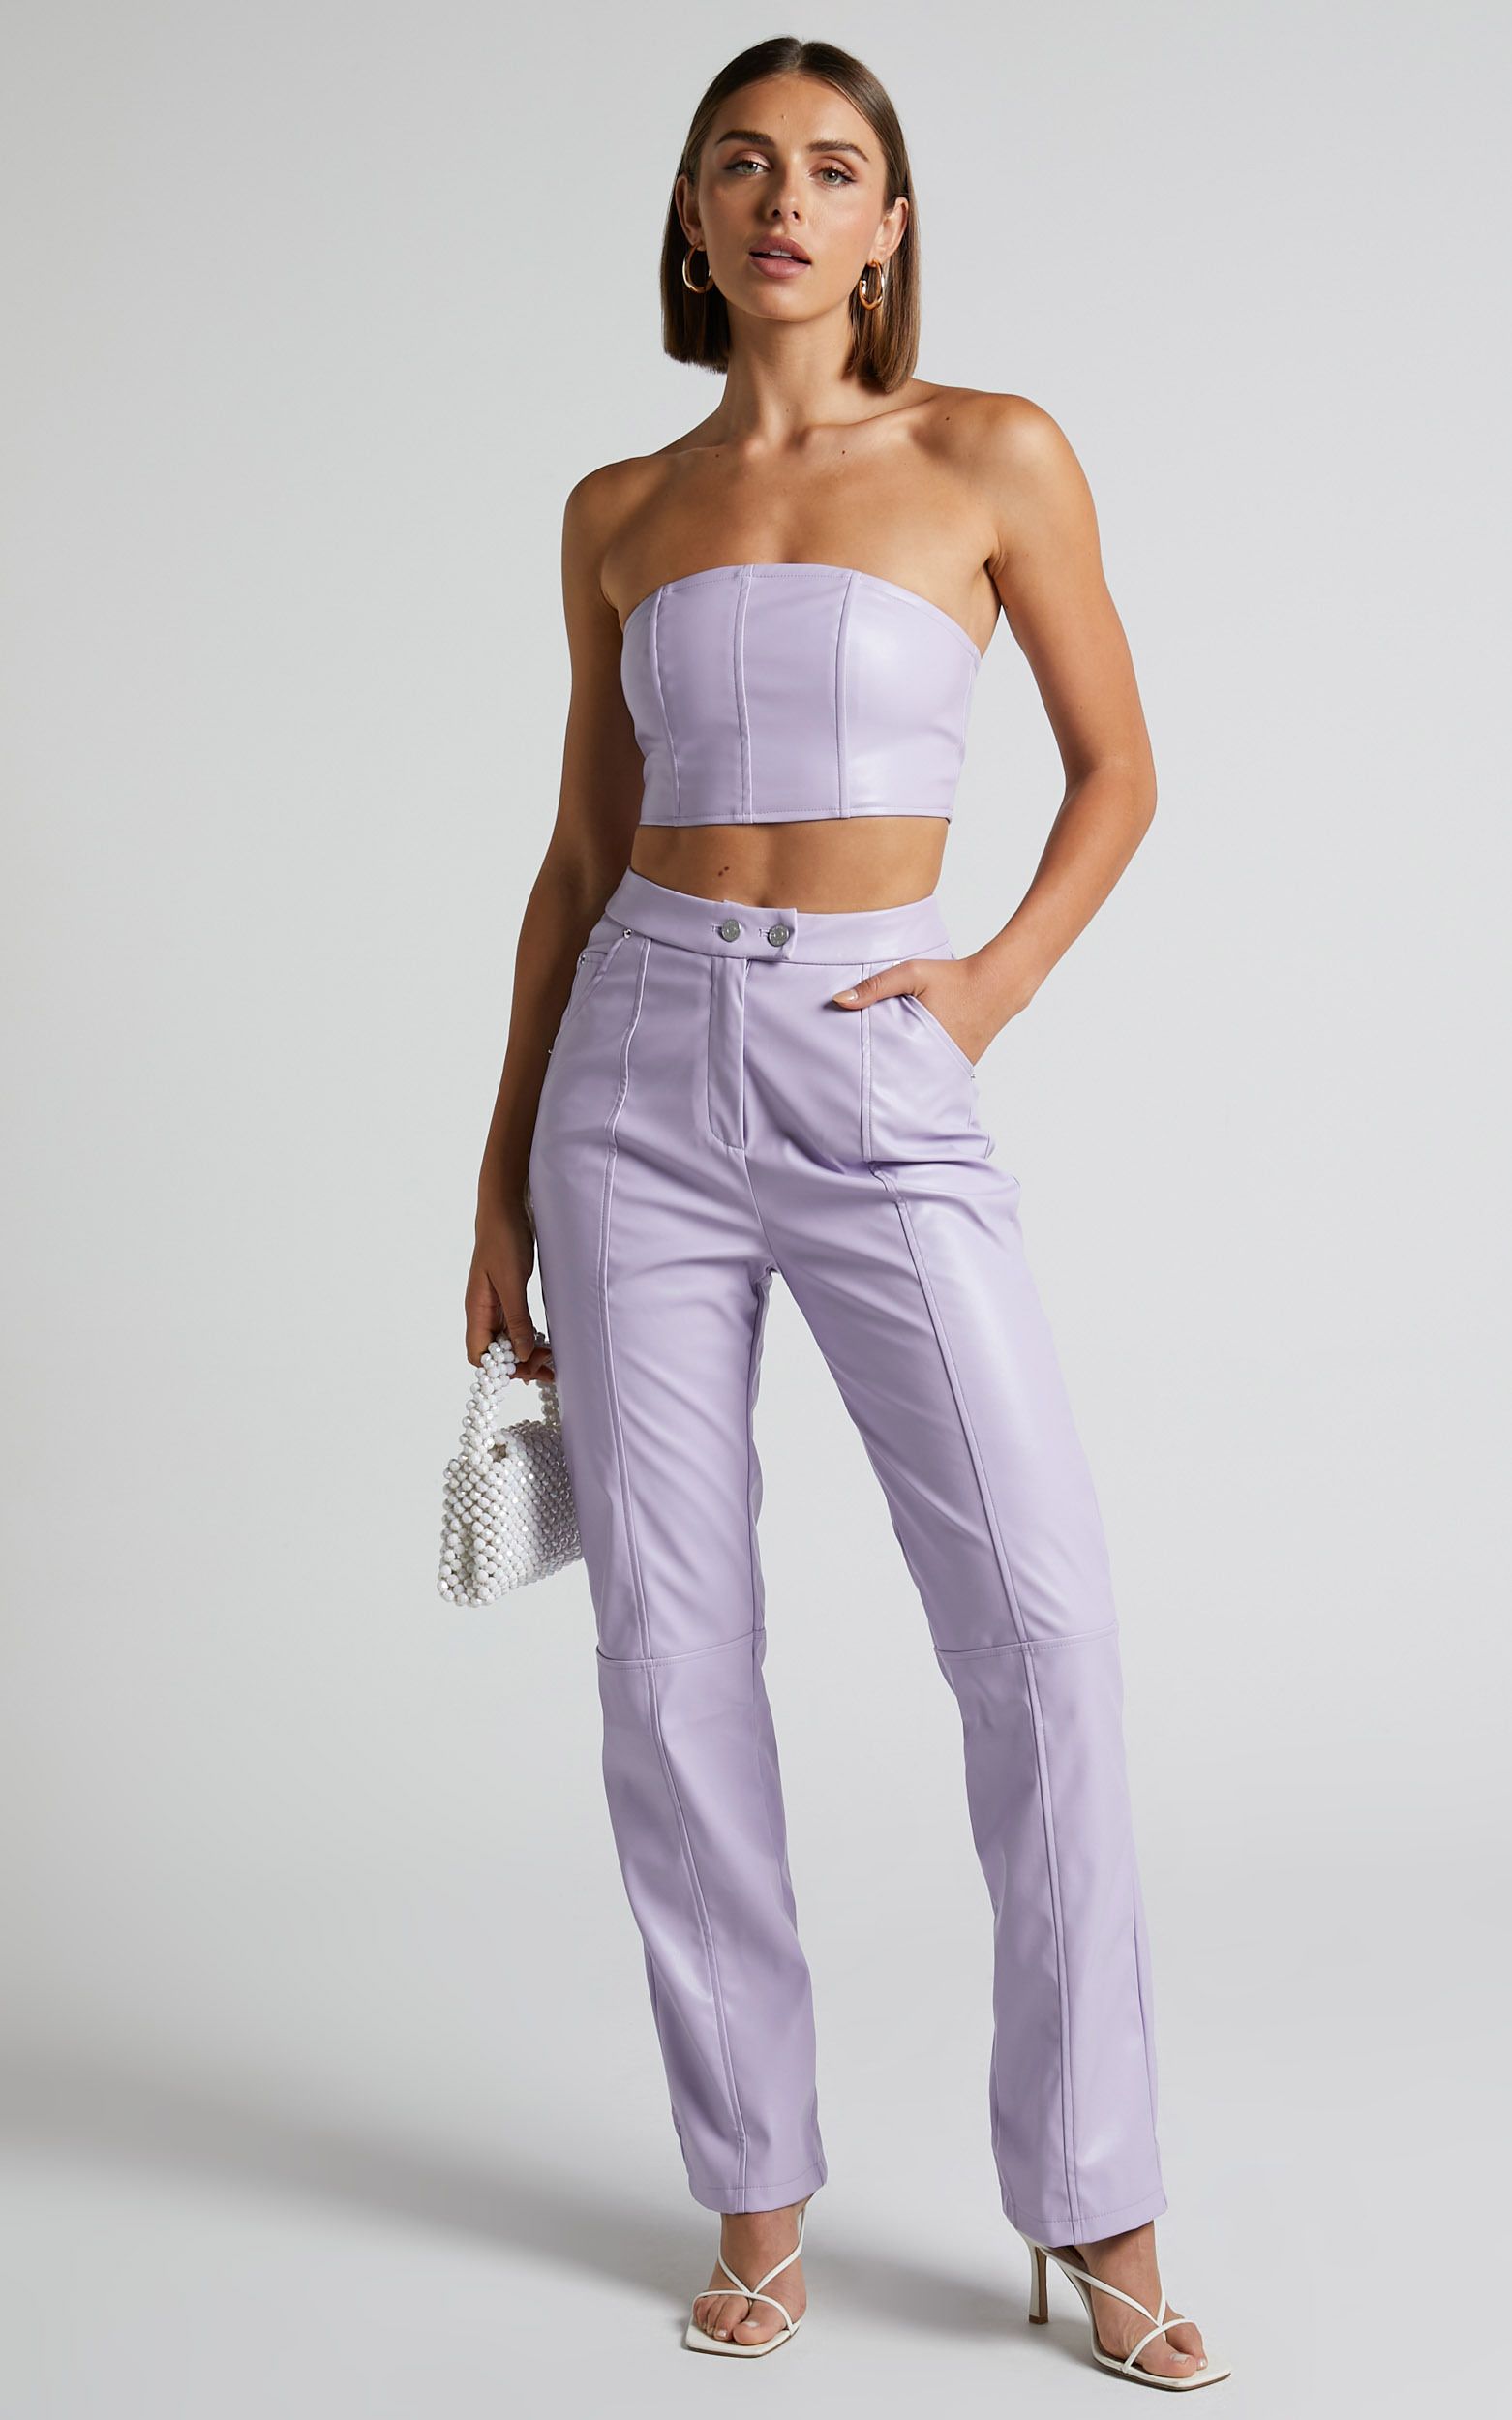 4th & Reckless - Tropez Leather Trouser in Lilac | Showpo (US, UK & Europe)